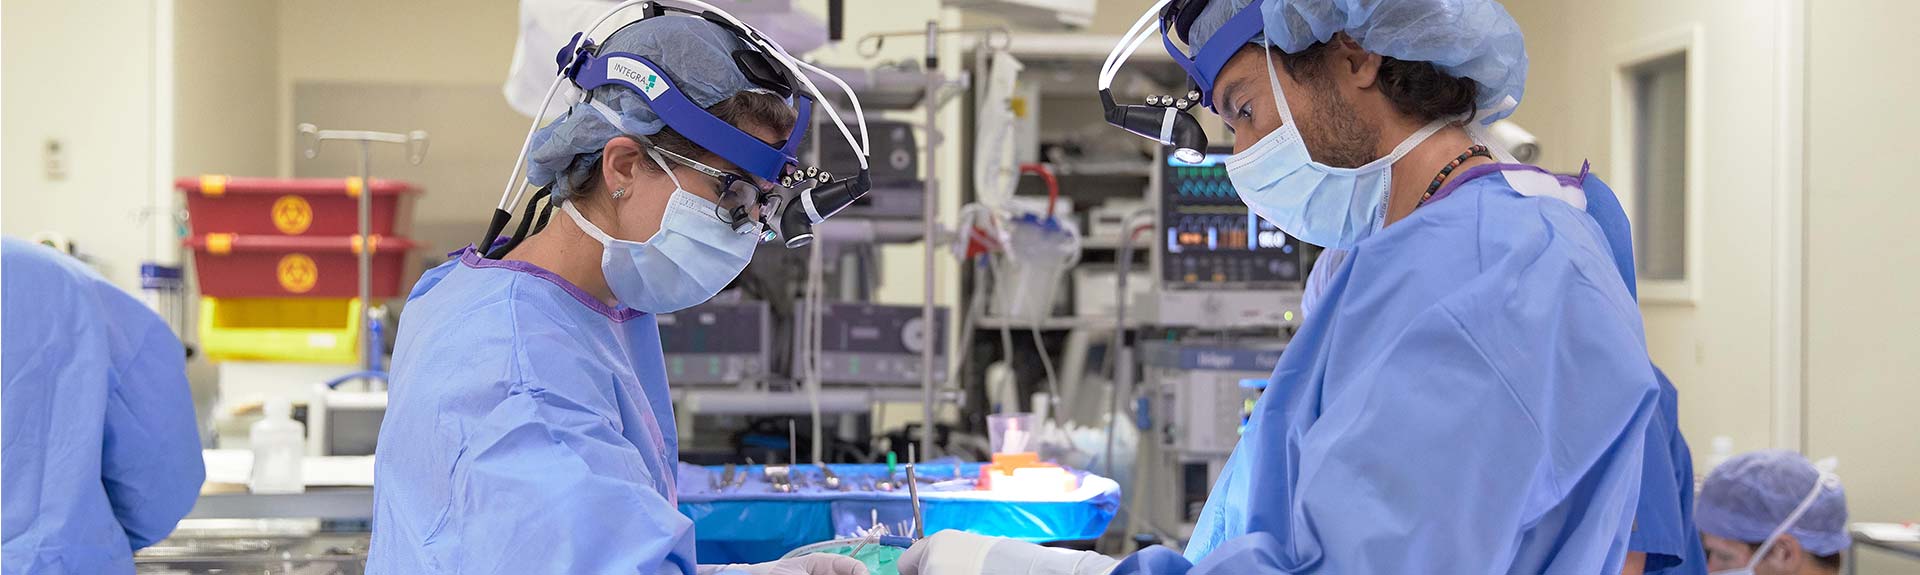 Image of two surgeons in operating room